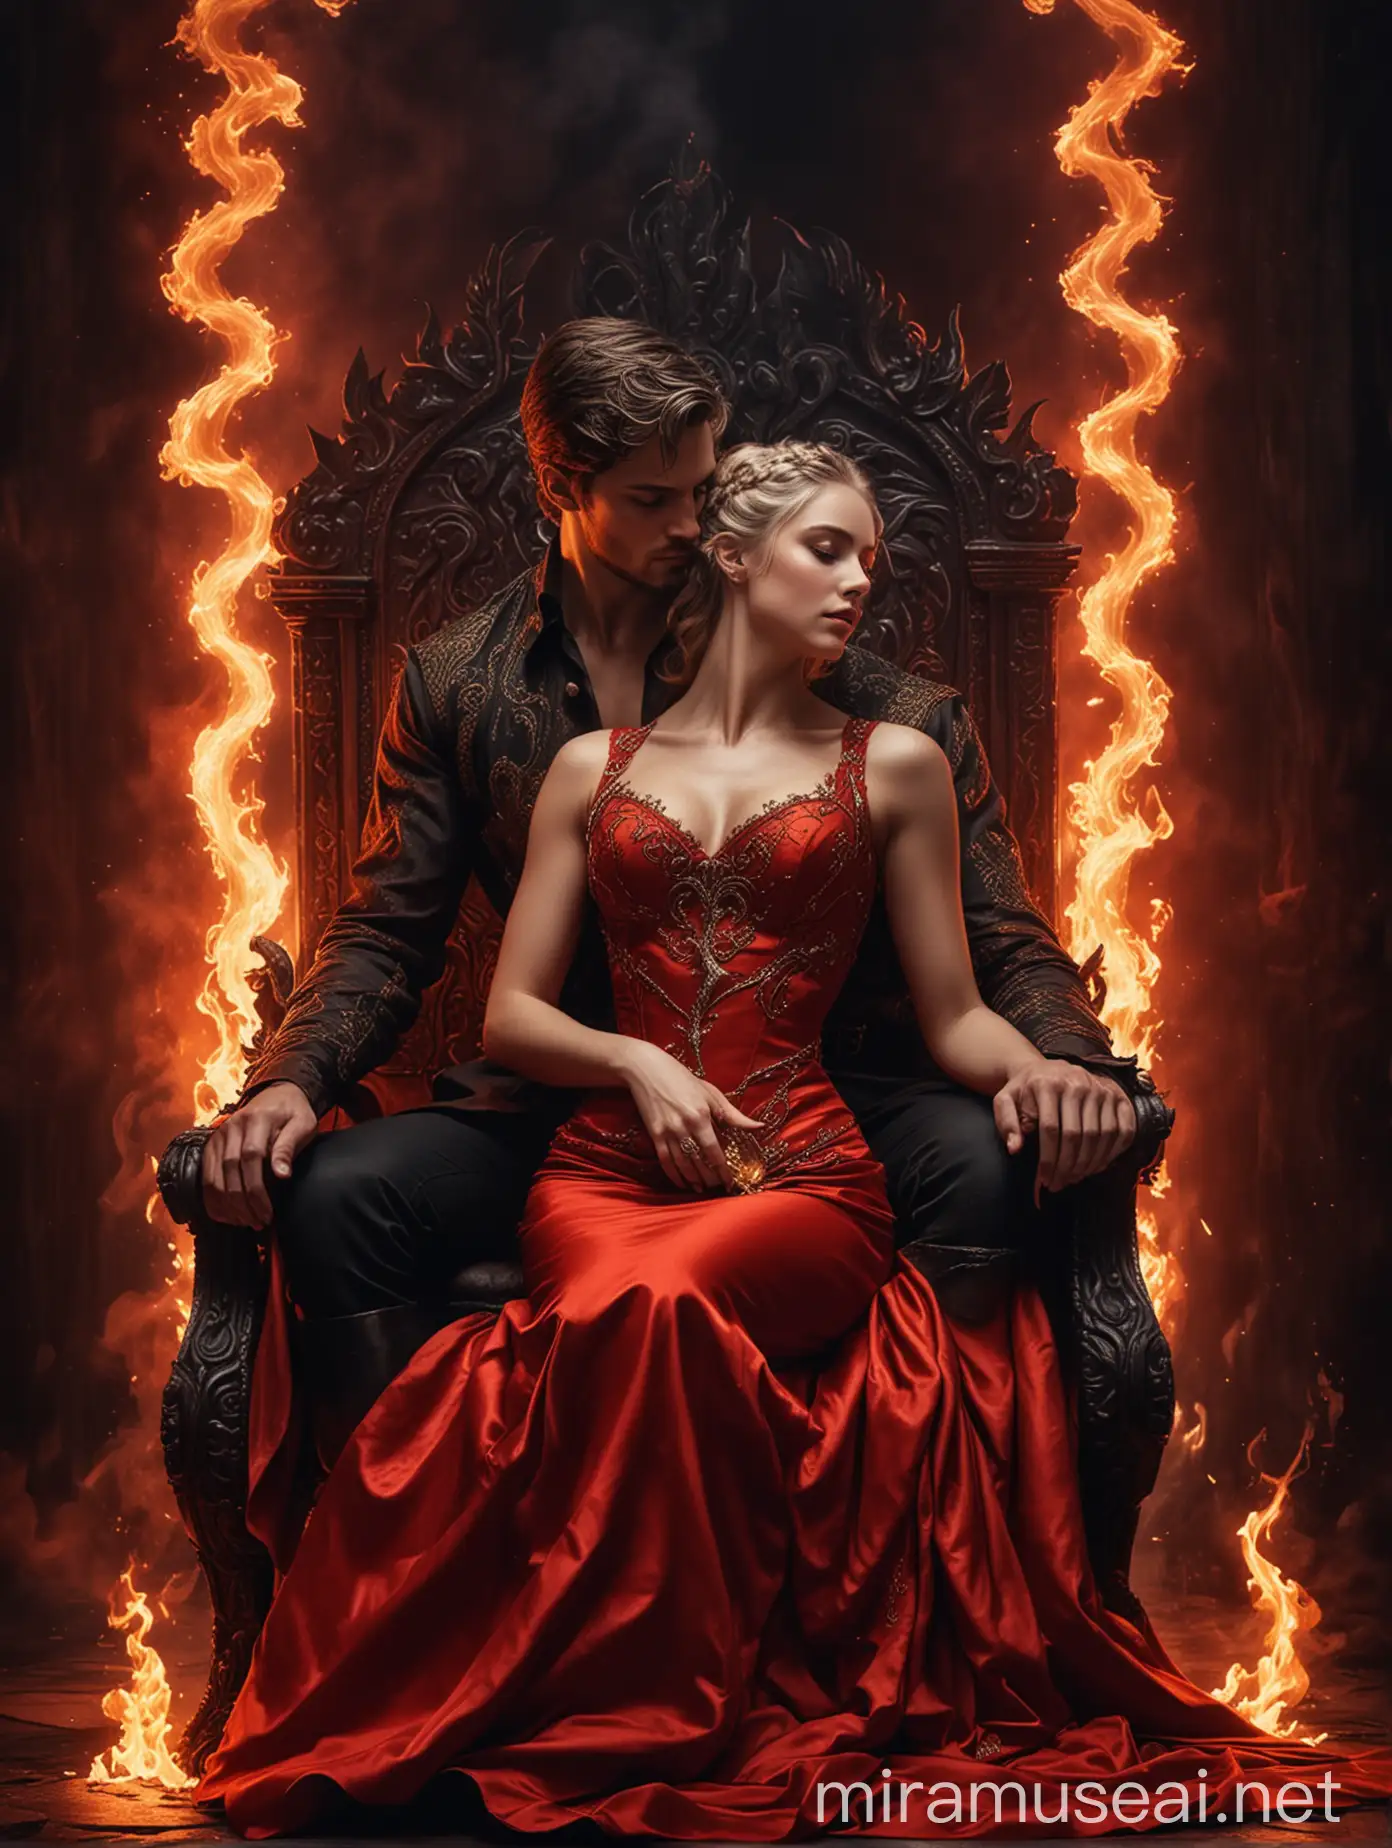 A beautiful lady in a red Royal fitted dress, held romantically by a handsome young muscular man, sitting on a dark throne, with flames surrounding them forming a serpent beautifully